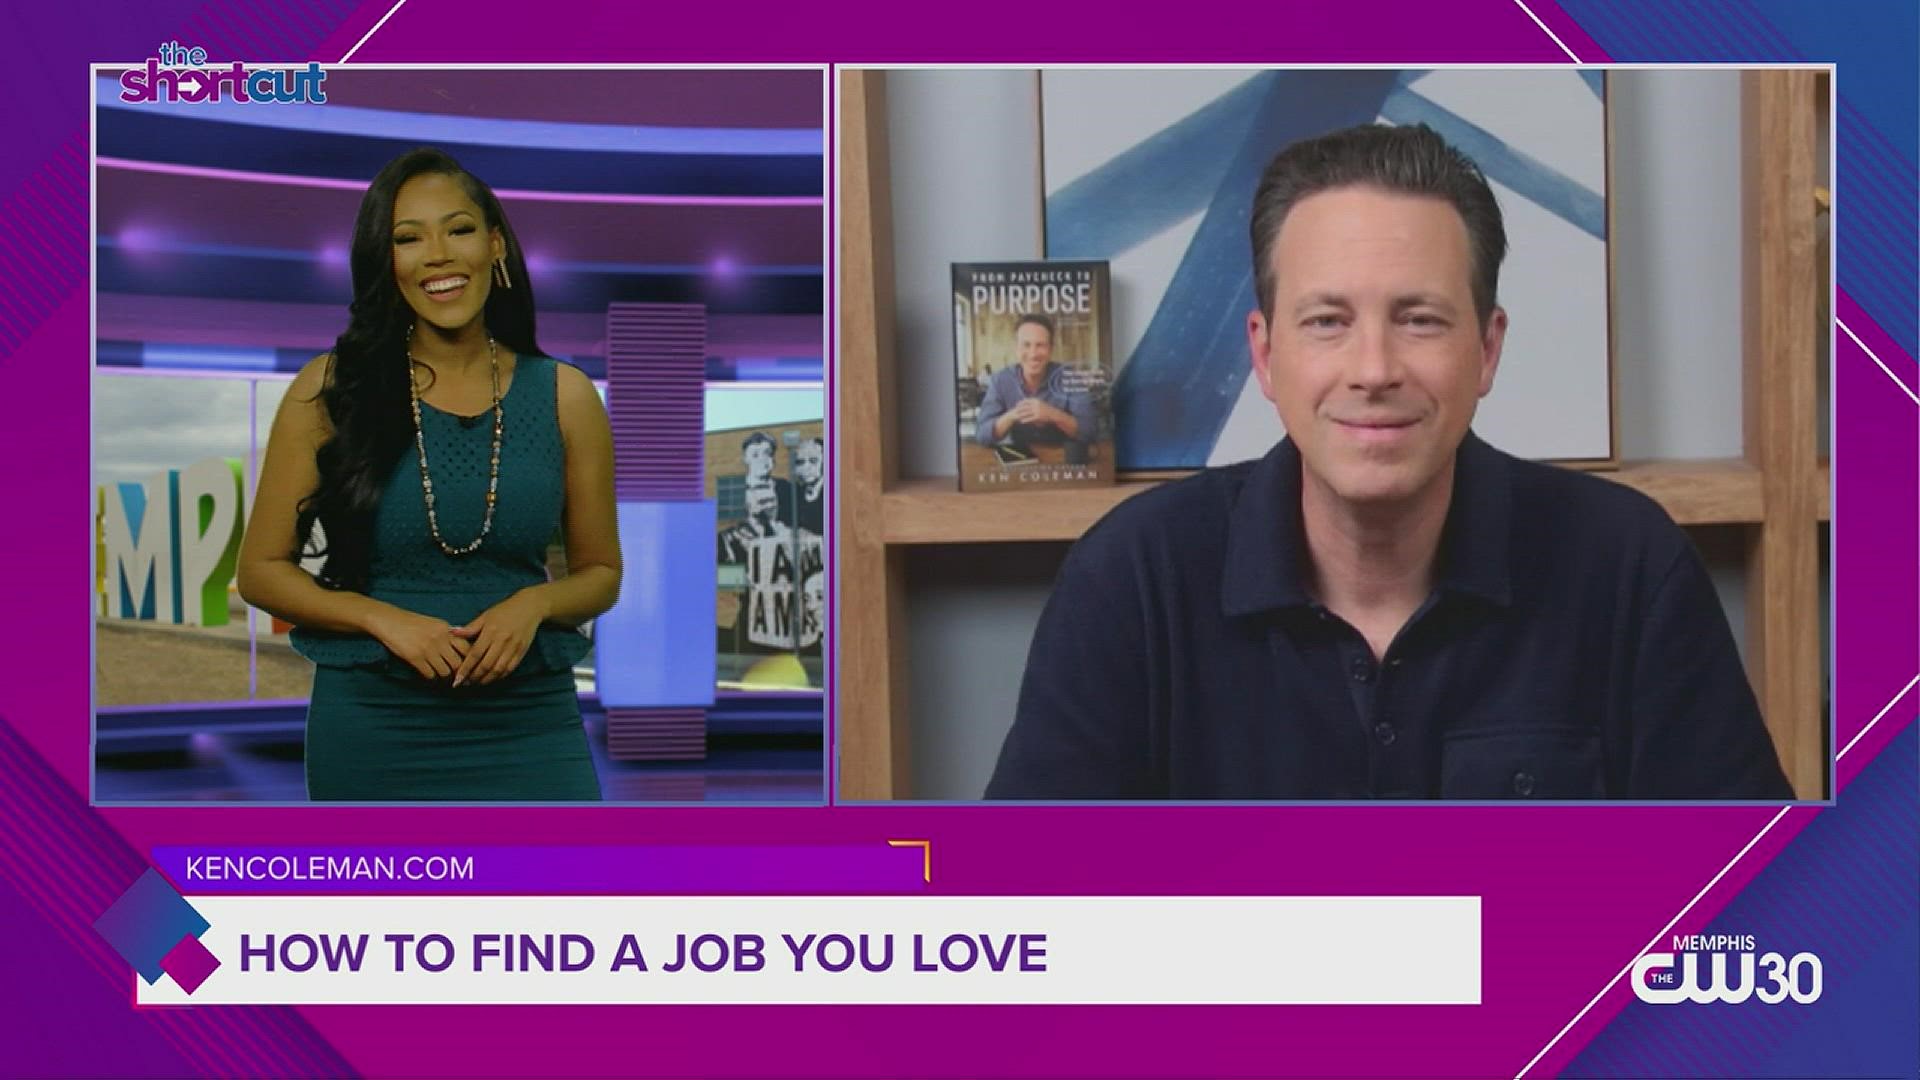 From networking dos and don'ts to career outlining, find your dream job and turn your paycheck into purpose once and for all using Ken Coleman's tips!